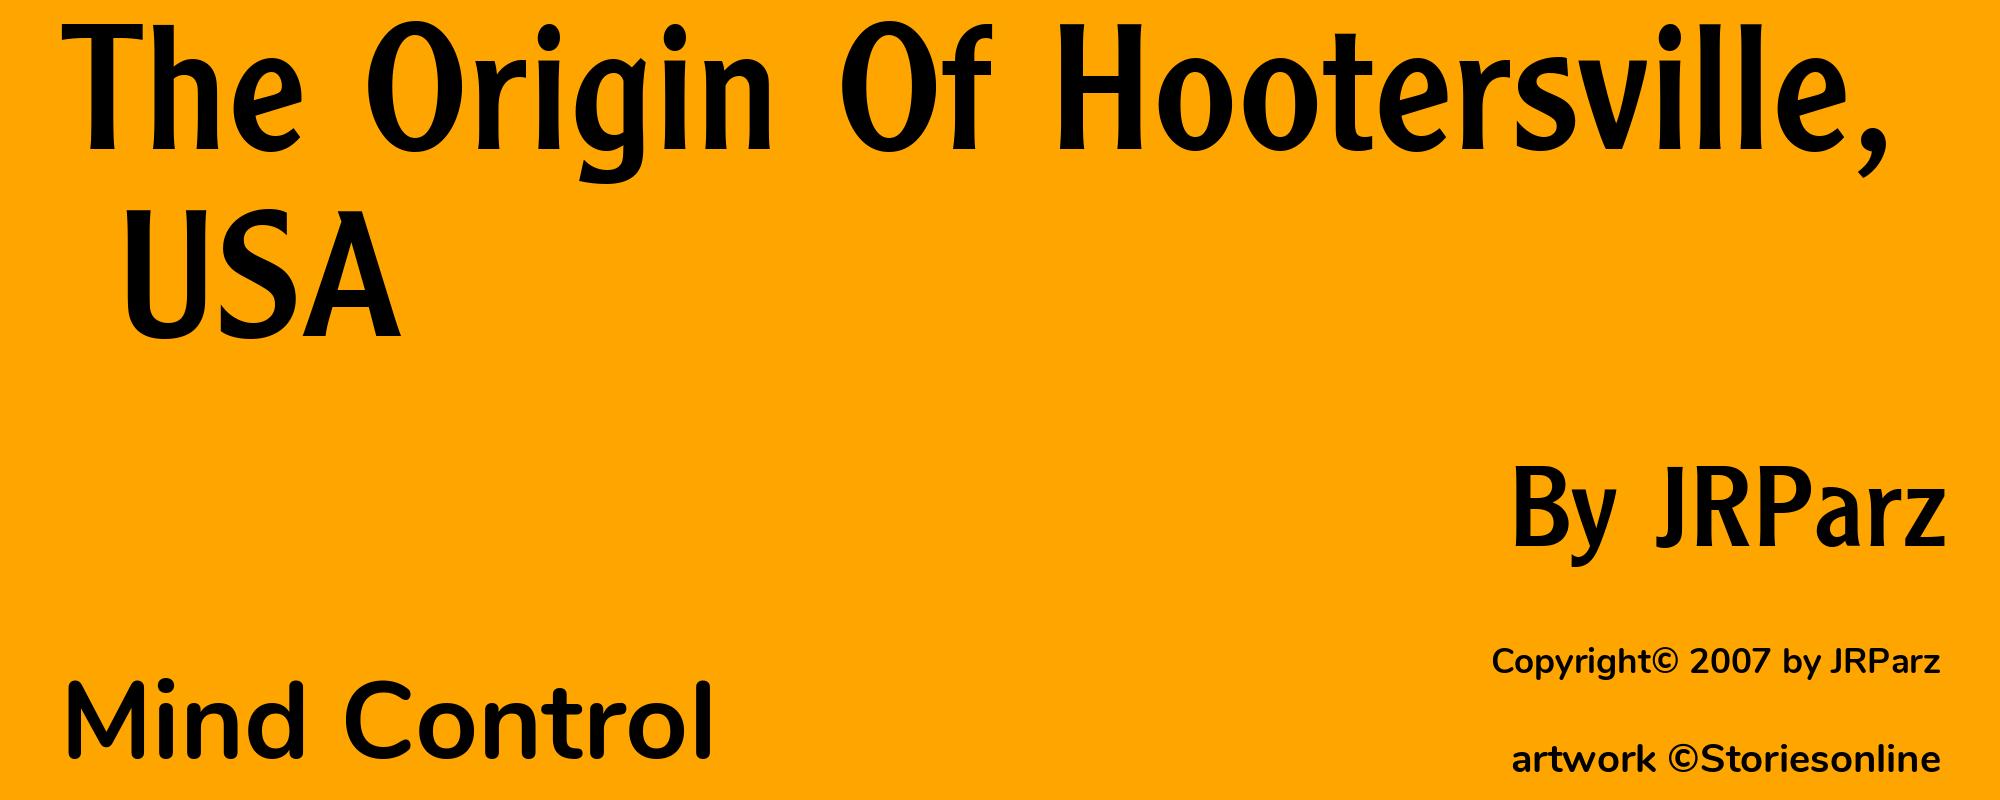 The Origin Of Hootersville, USA - Cover